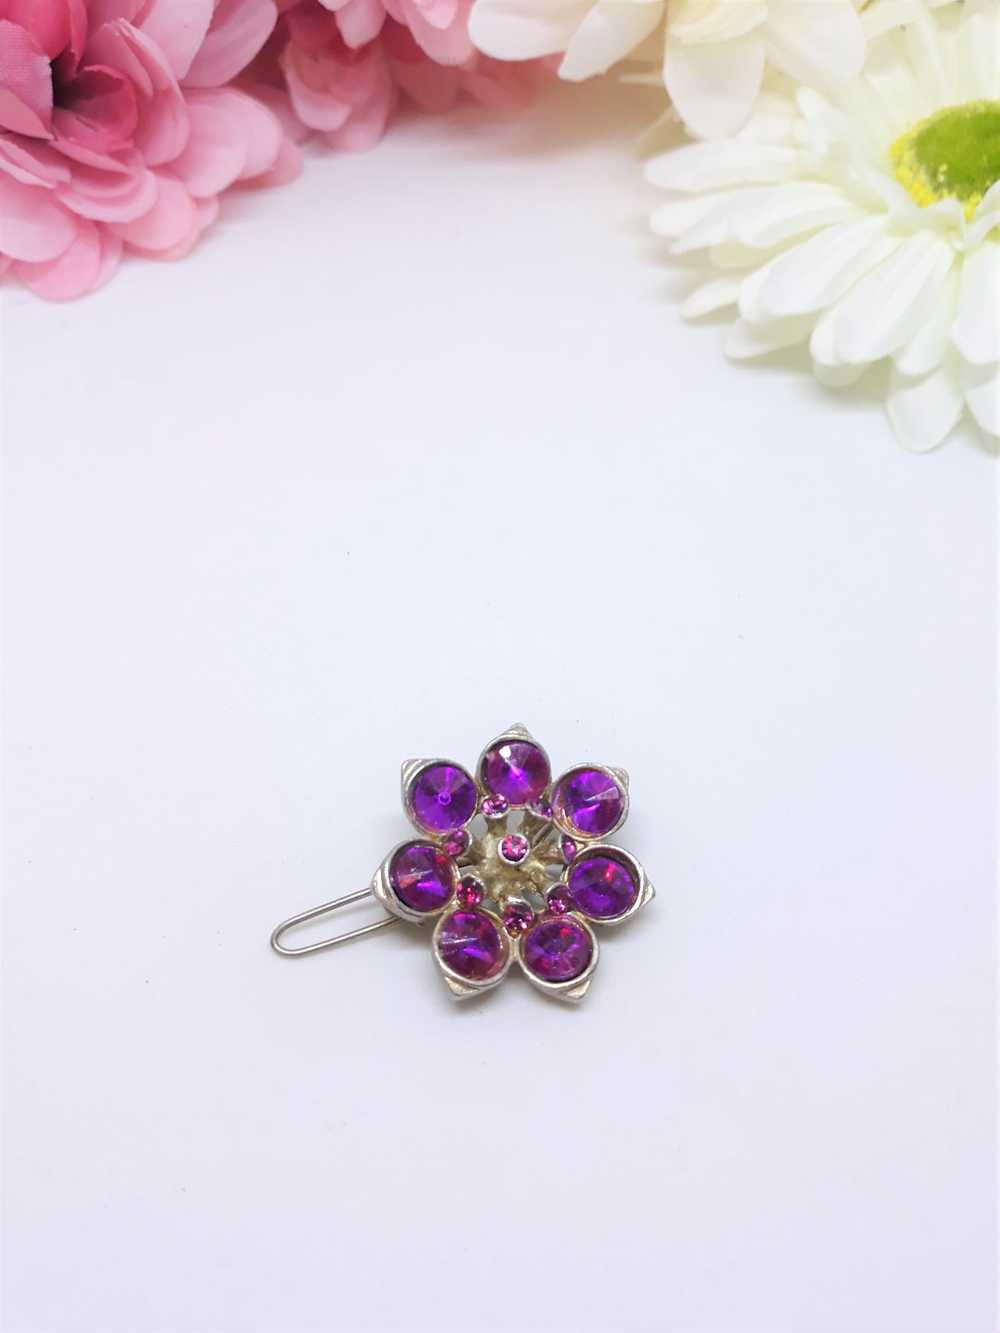 Gorgeous 1950s Purple Floral Hair Pin - image 7